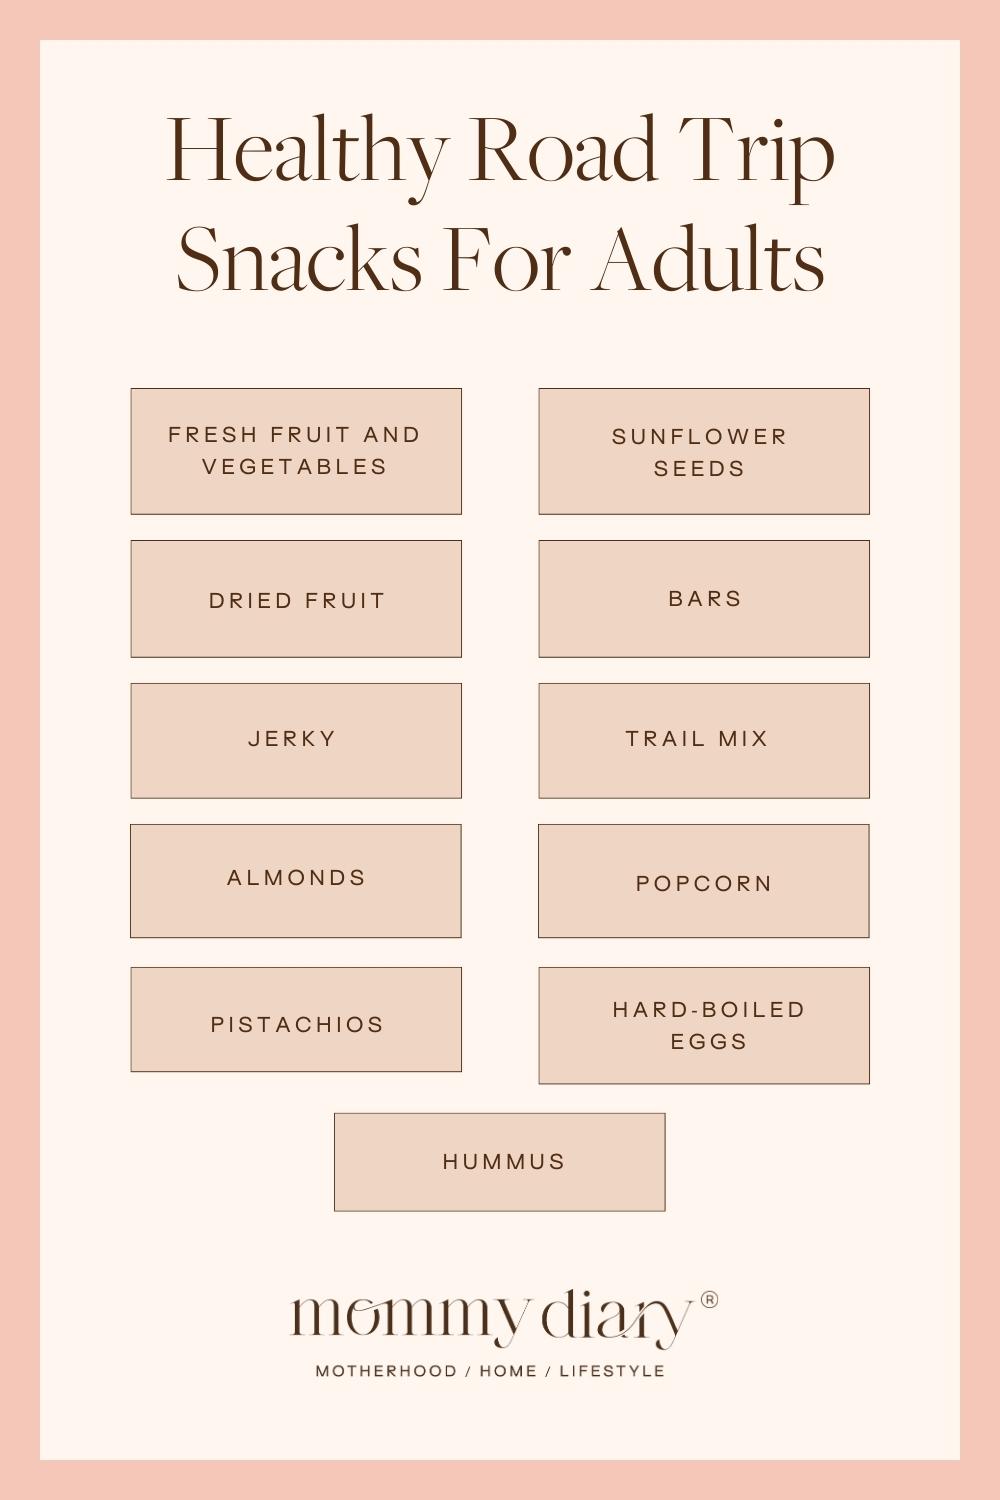 Healthy Road Trip Snacks for Adults